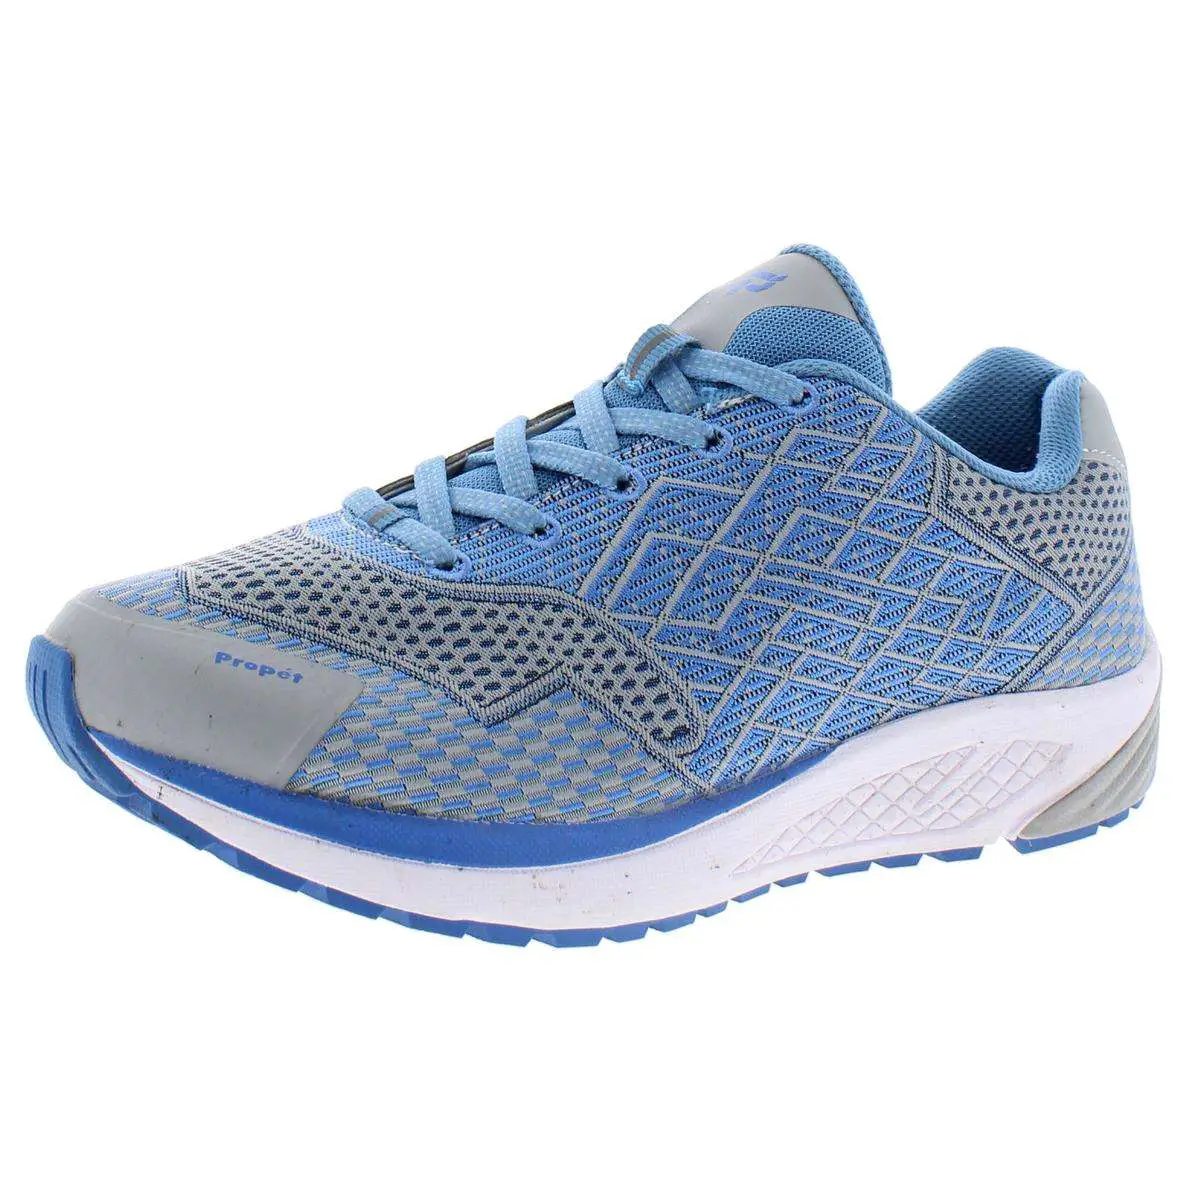 Propet Womens Blue Running Shoes Sneakers 8.5 Extra Wide (E+, WW) BHFO ...